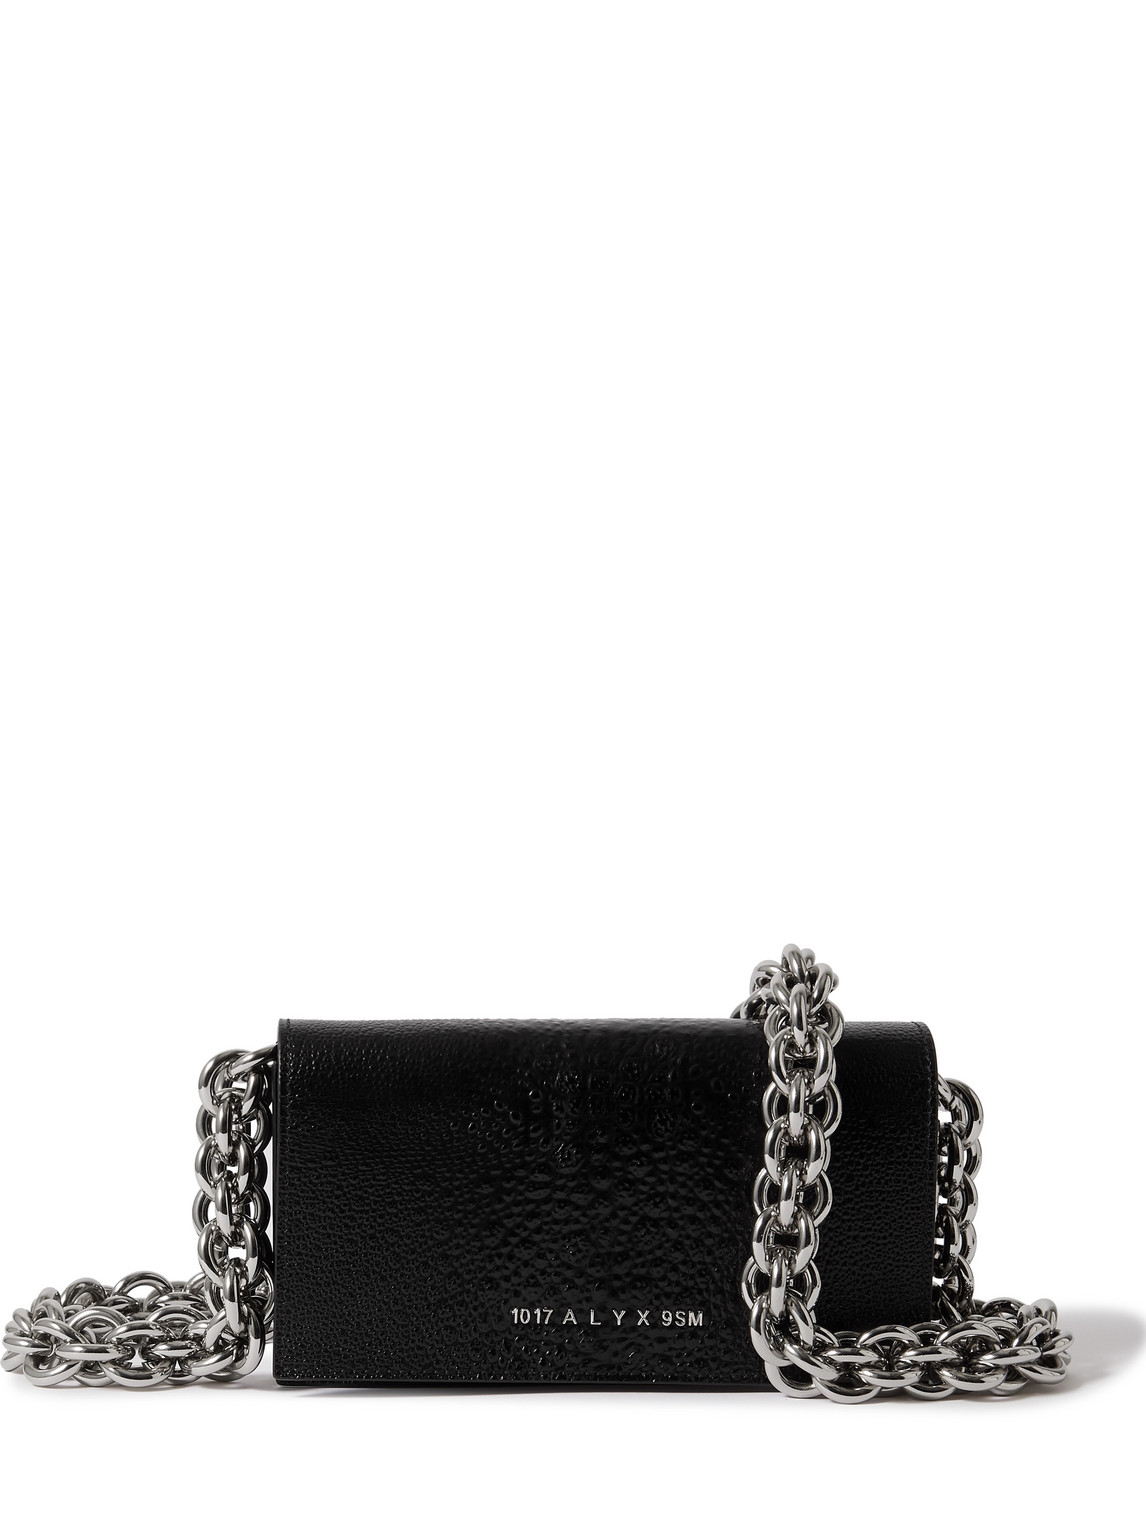 Alyx Giulia Textured-leather Messenger Bag In Black